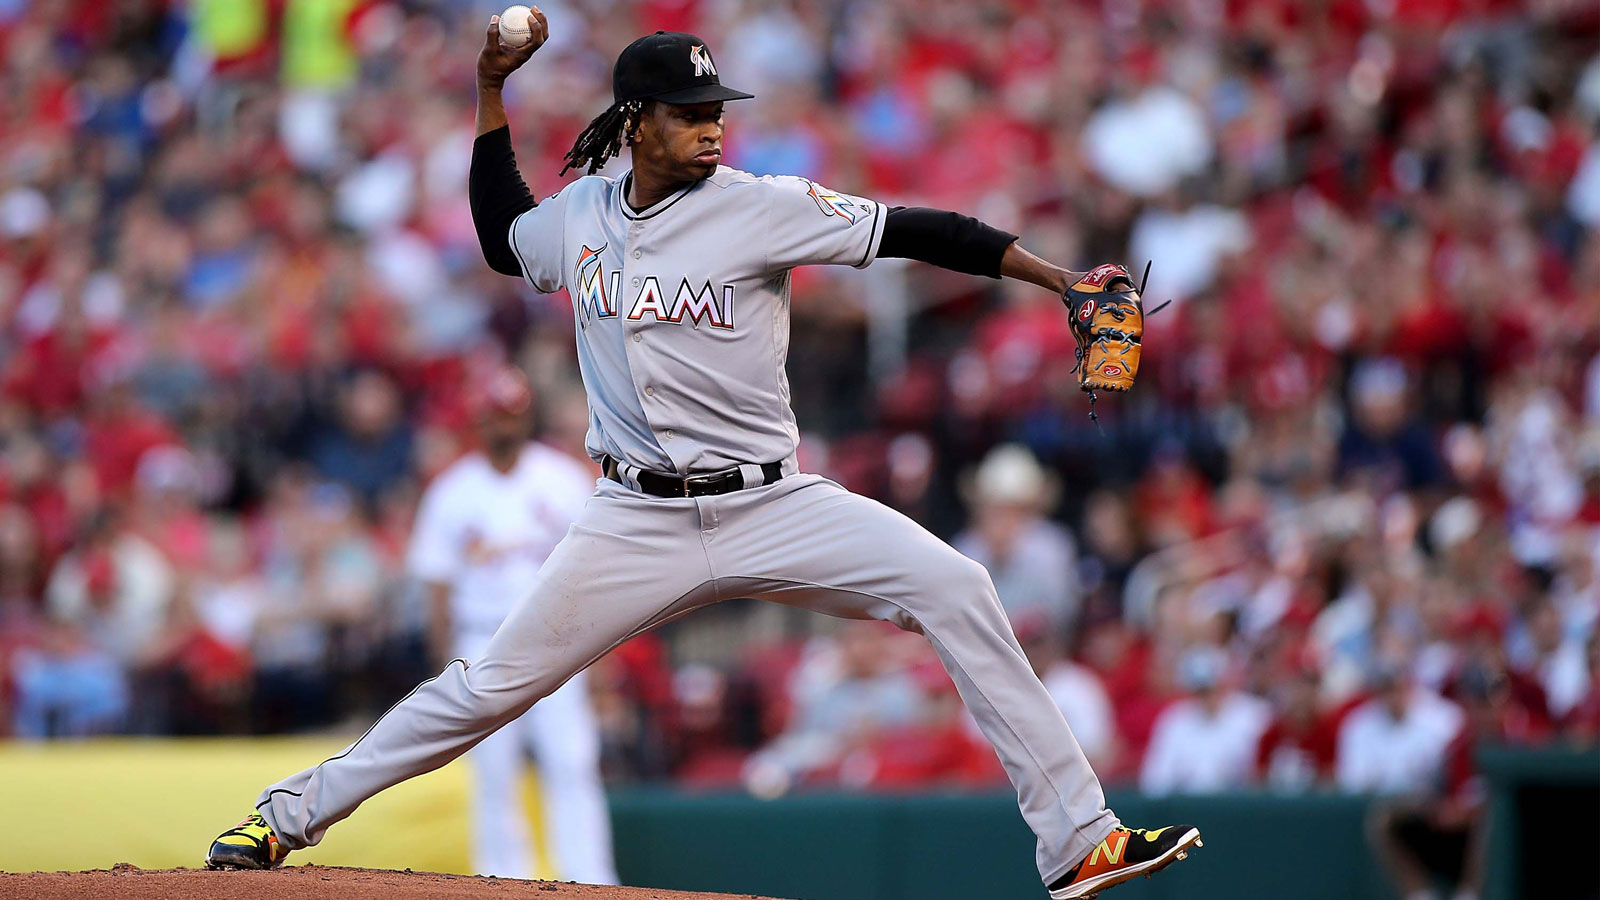 José Ureña gets his 1st win of the season, Marlins take care of Cardinals